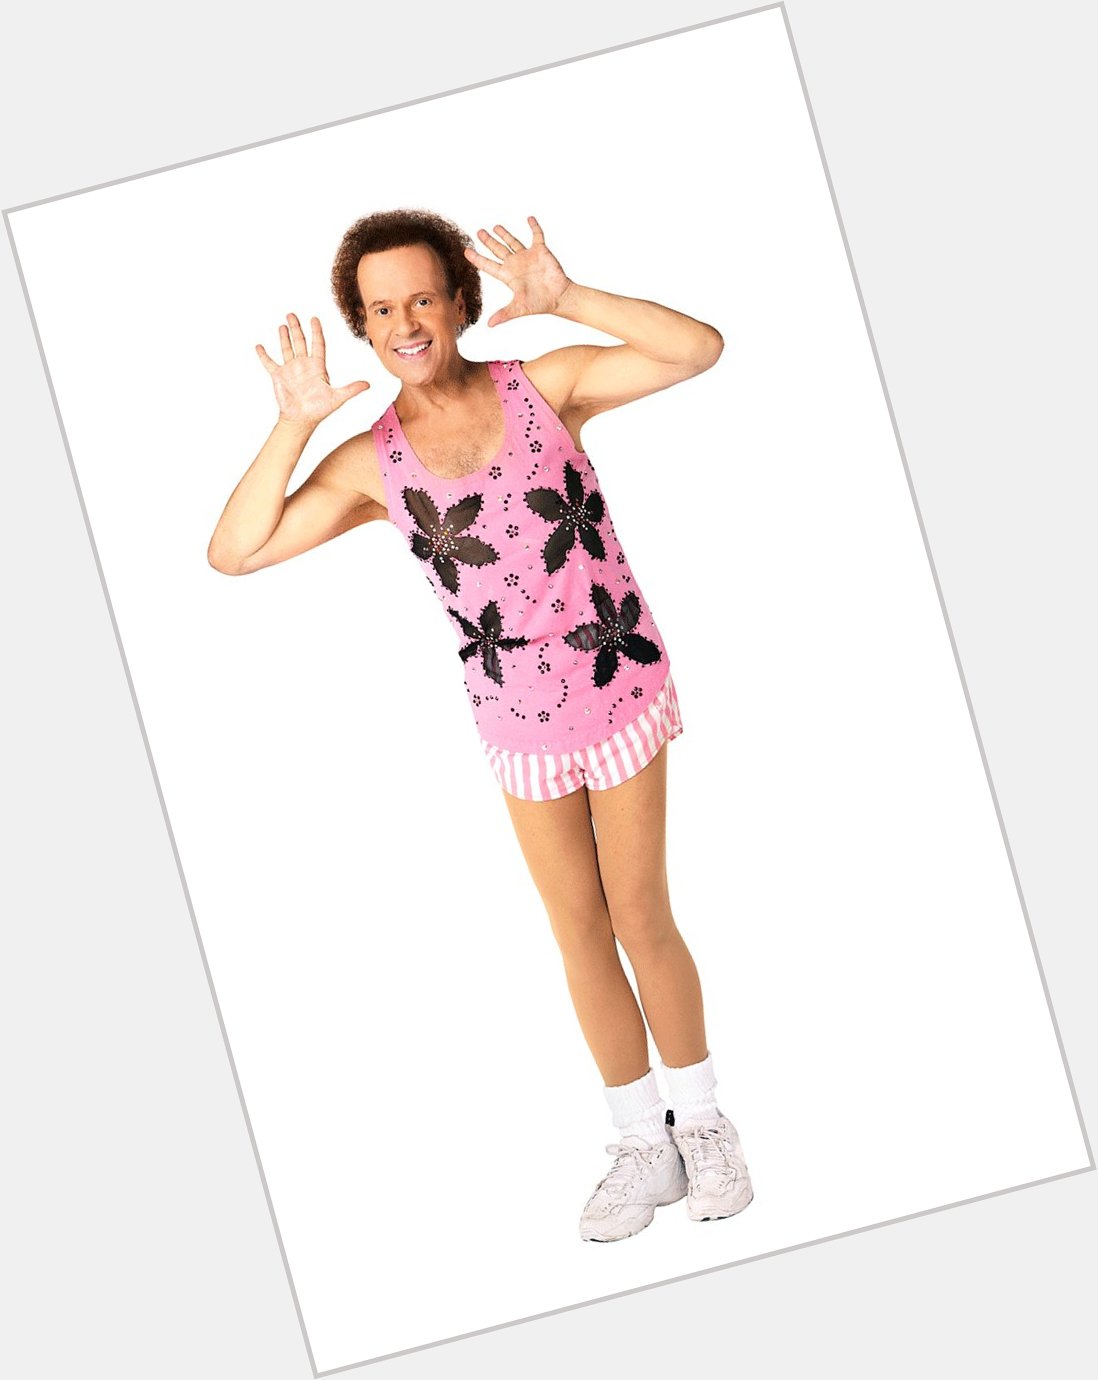 8 a.m. and I\m already sweating to the oldies...which reminds me...Happy Birthday, Richard Simmons! 